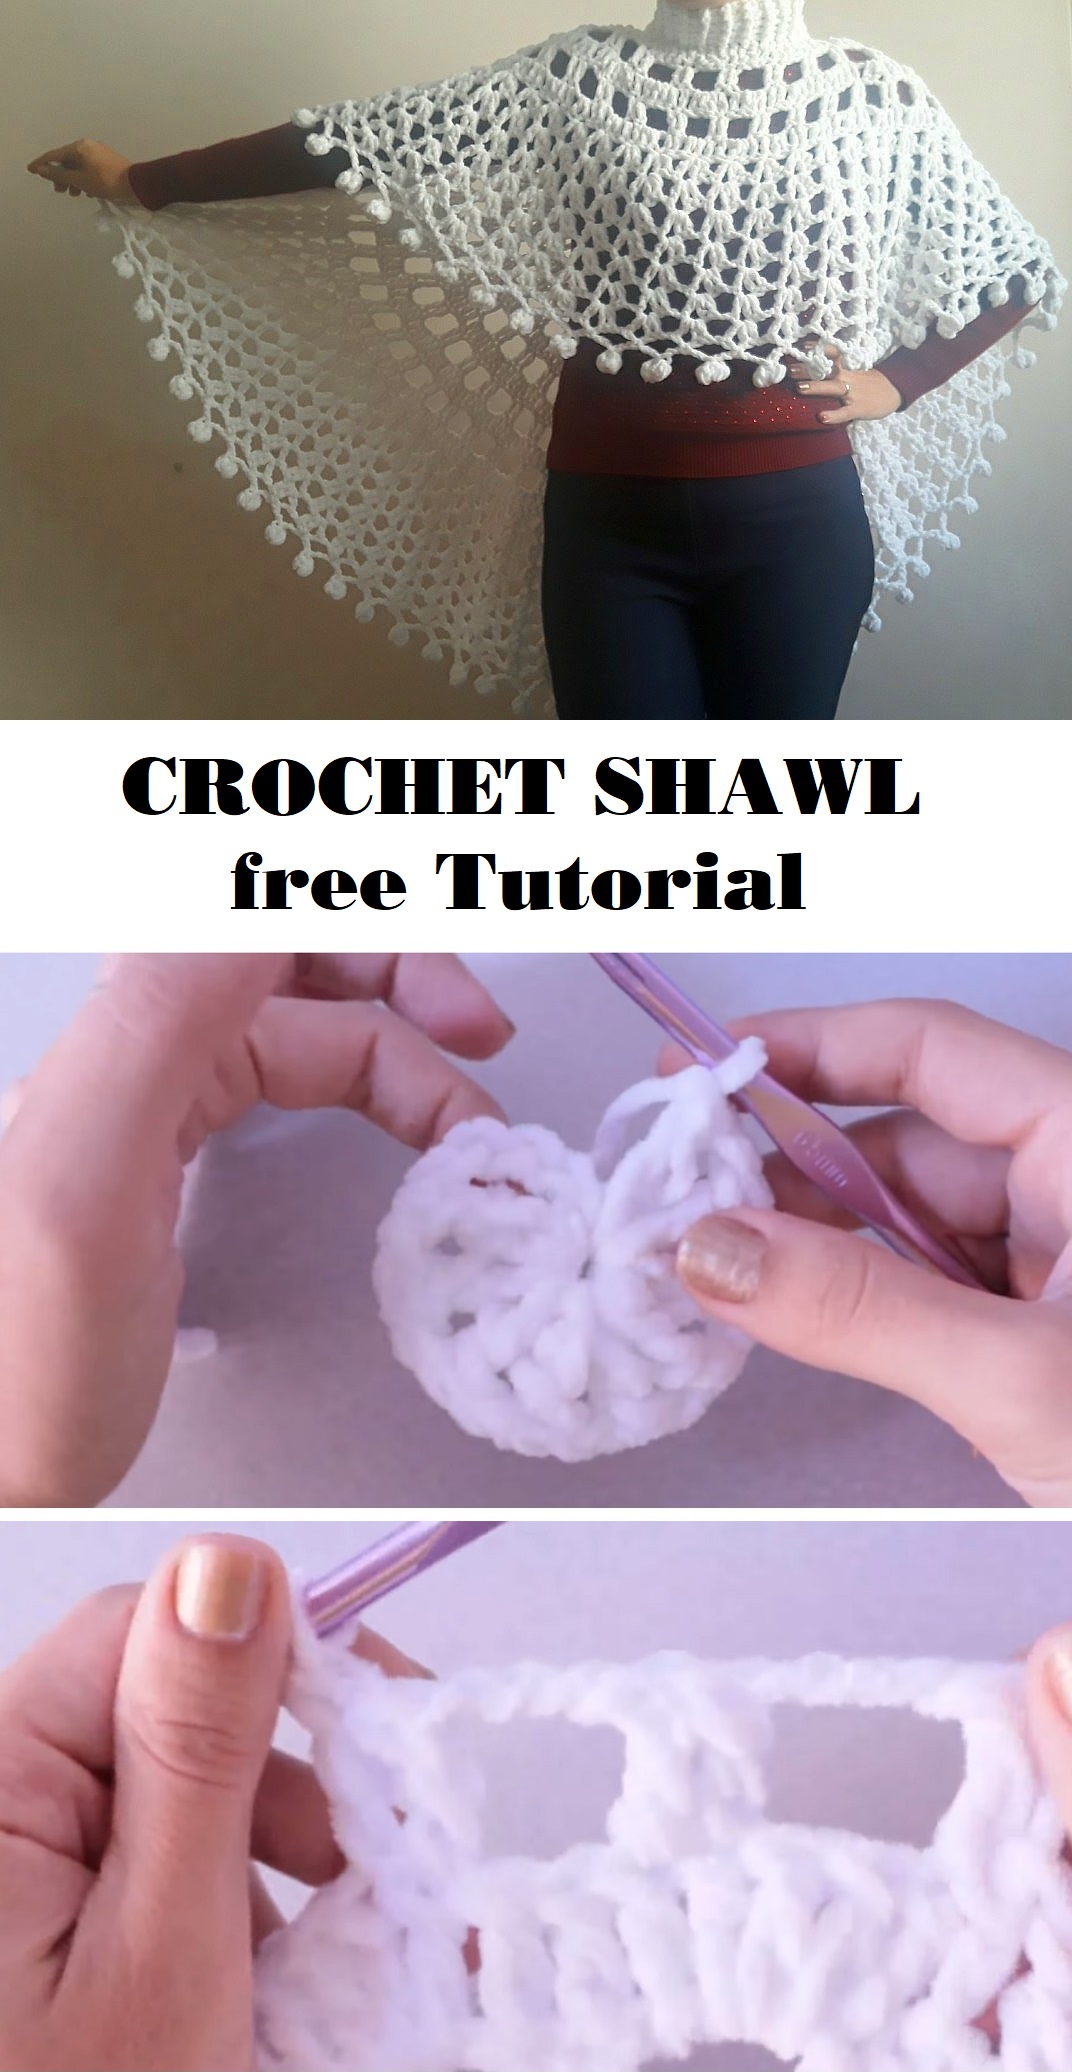 How to Crochet Lace Shawl